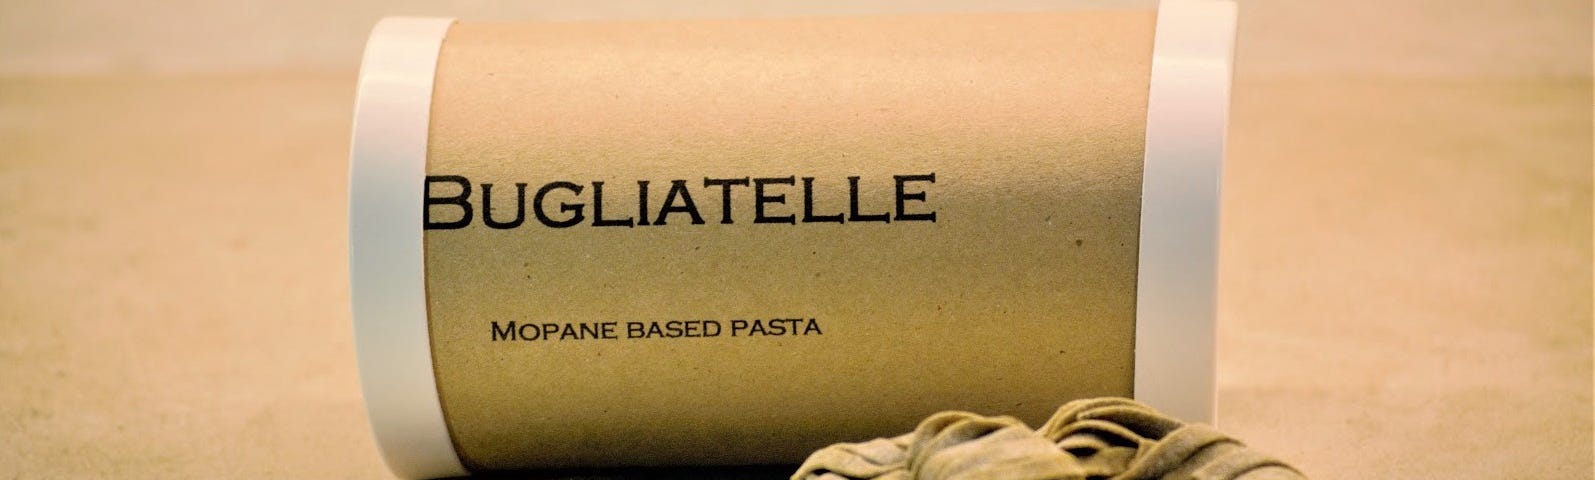 Container of bugliatelle, pasta made from insects